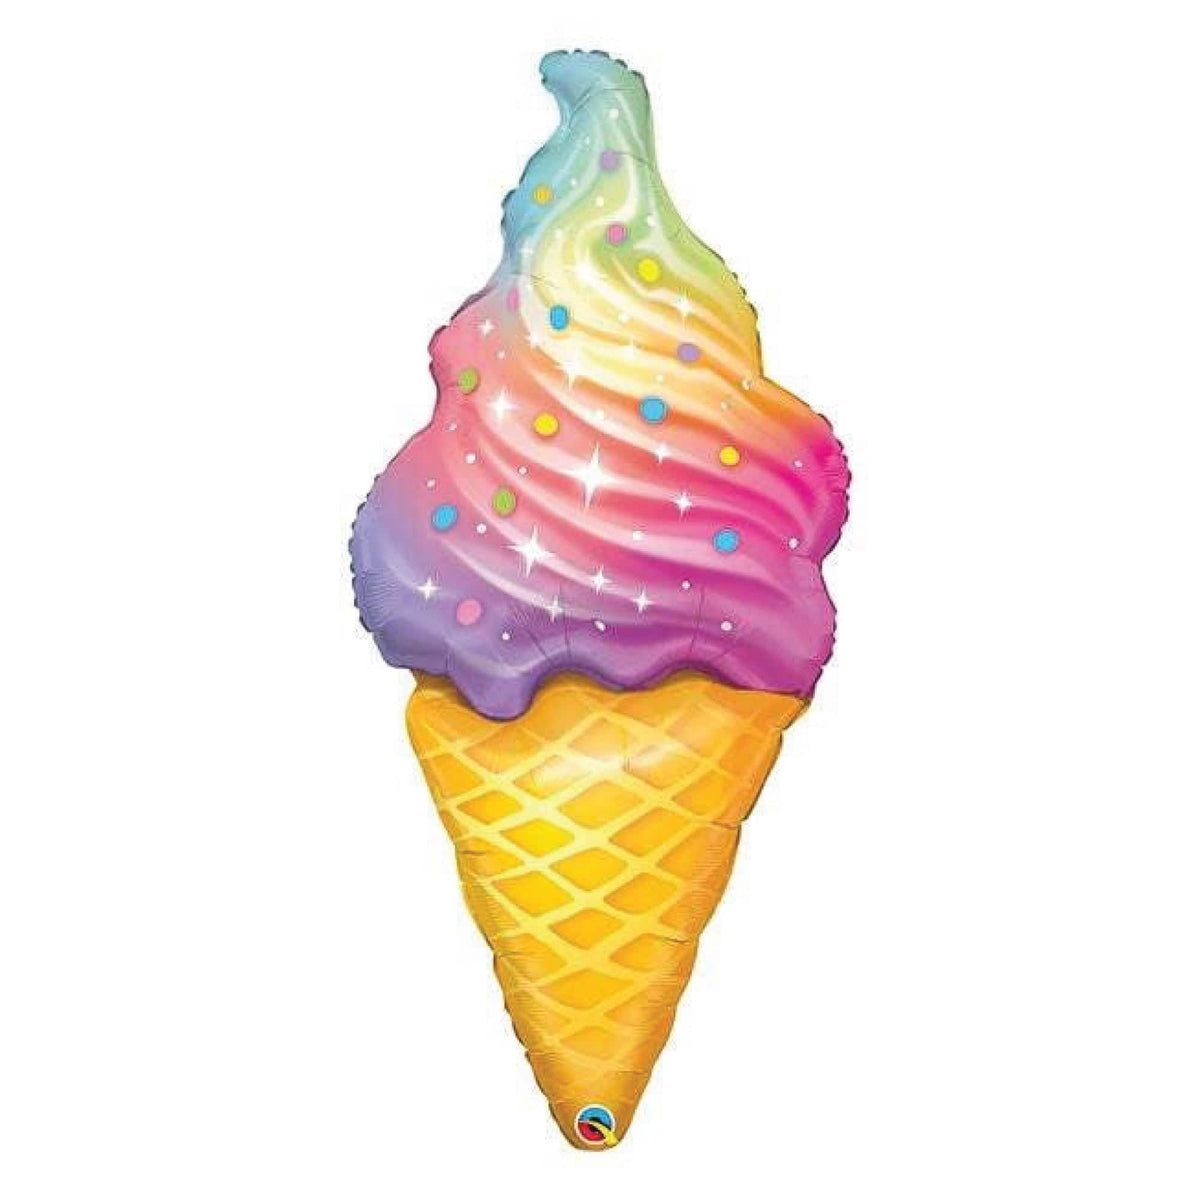 Buy Ice Cream Cone Print: Digital Print of an Original Drawing Available  5x7 or 8x10 Online in India - Etsy